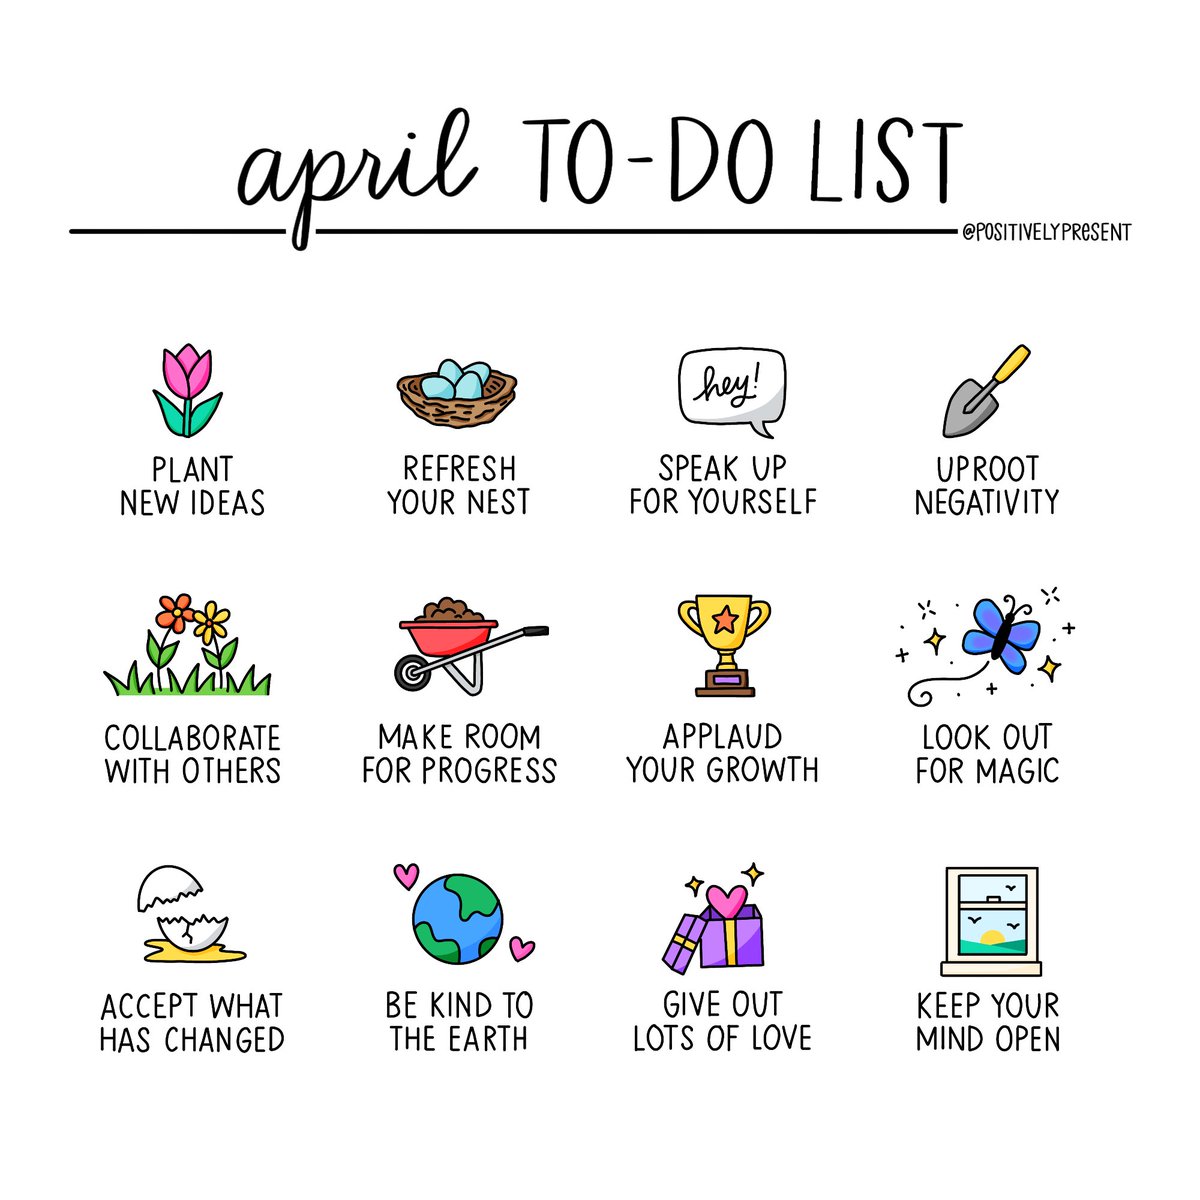 Happy April! ☔️ Here are some ideas to add to your to-do list: